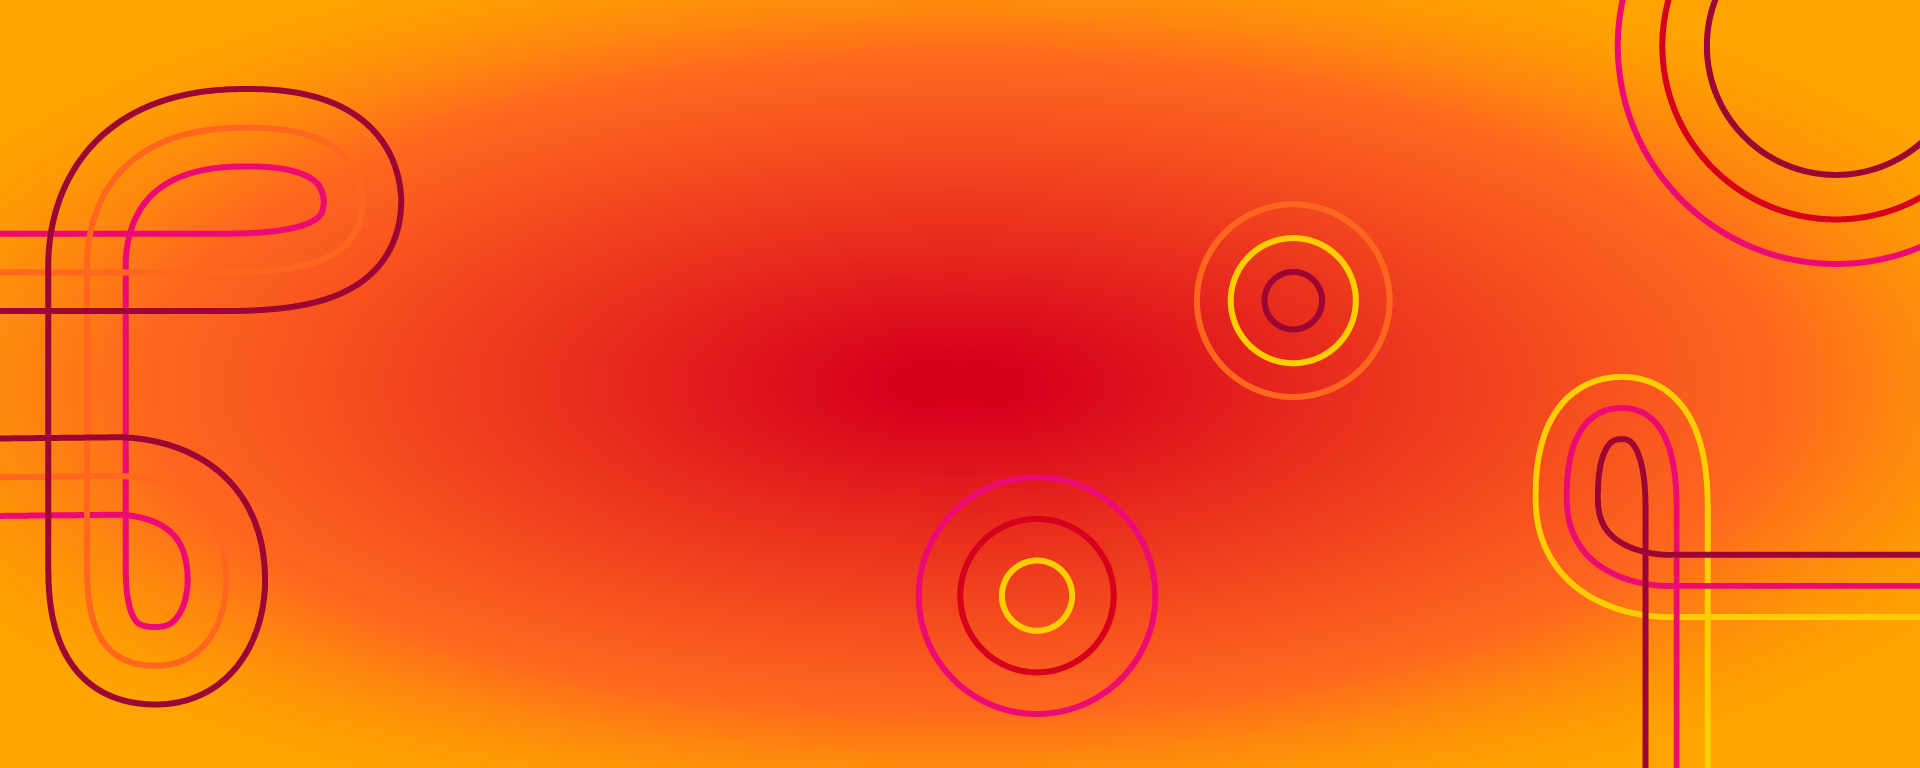 Orange gradient background with orange, yellow, red and pink swirls on top